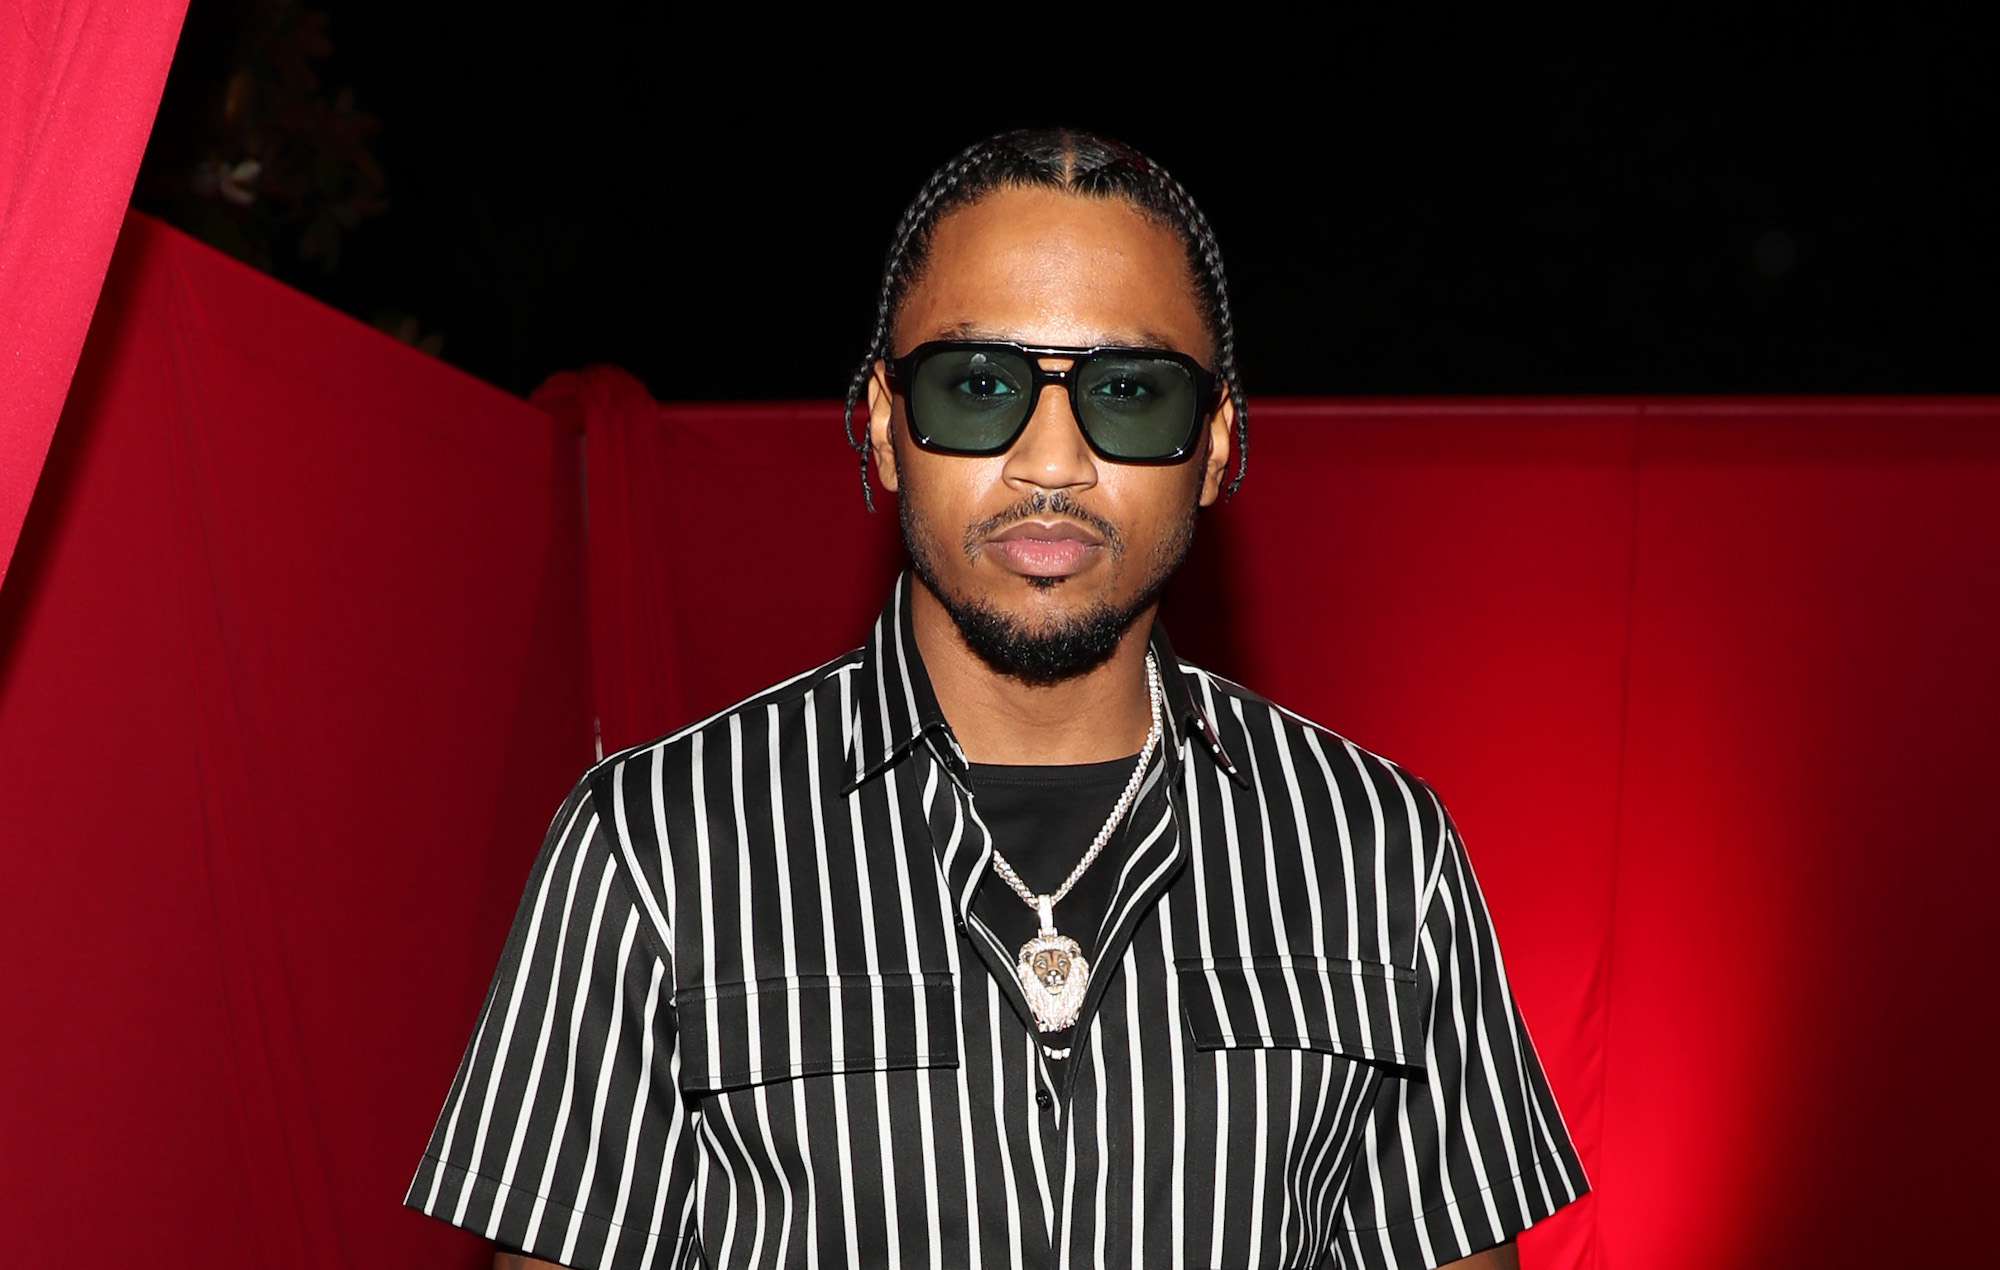 Trey Songz, Atlantic Records and Kevin Liles sued for rape